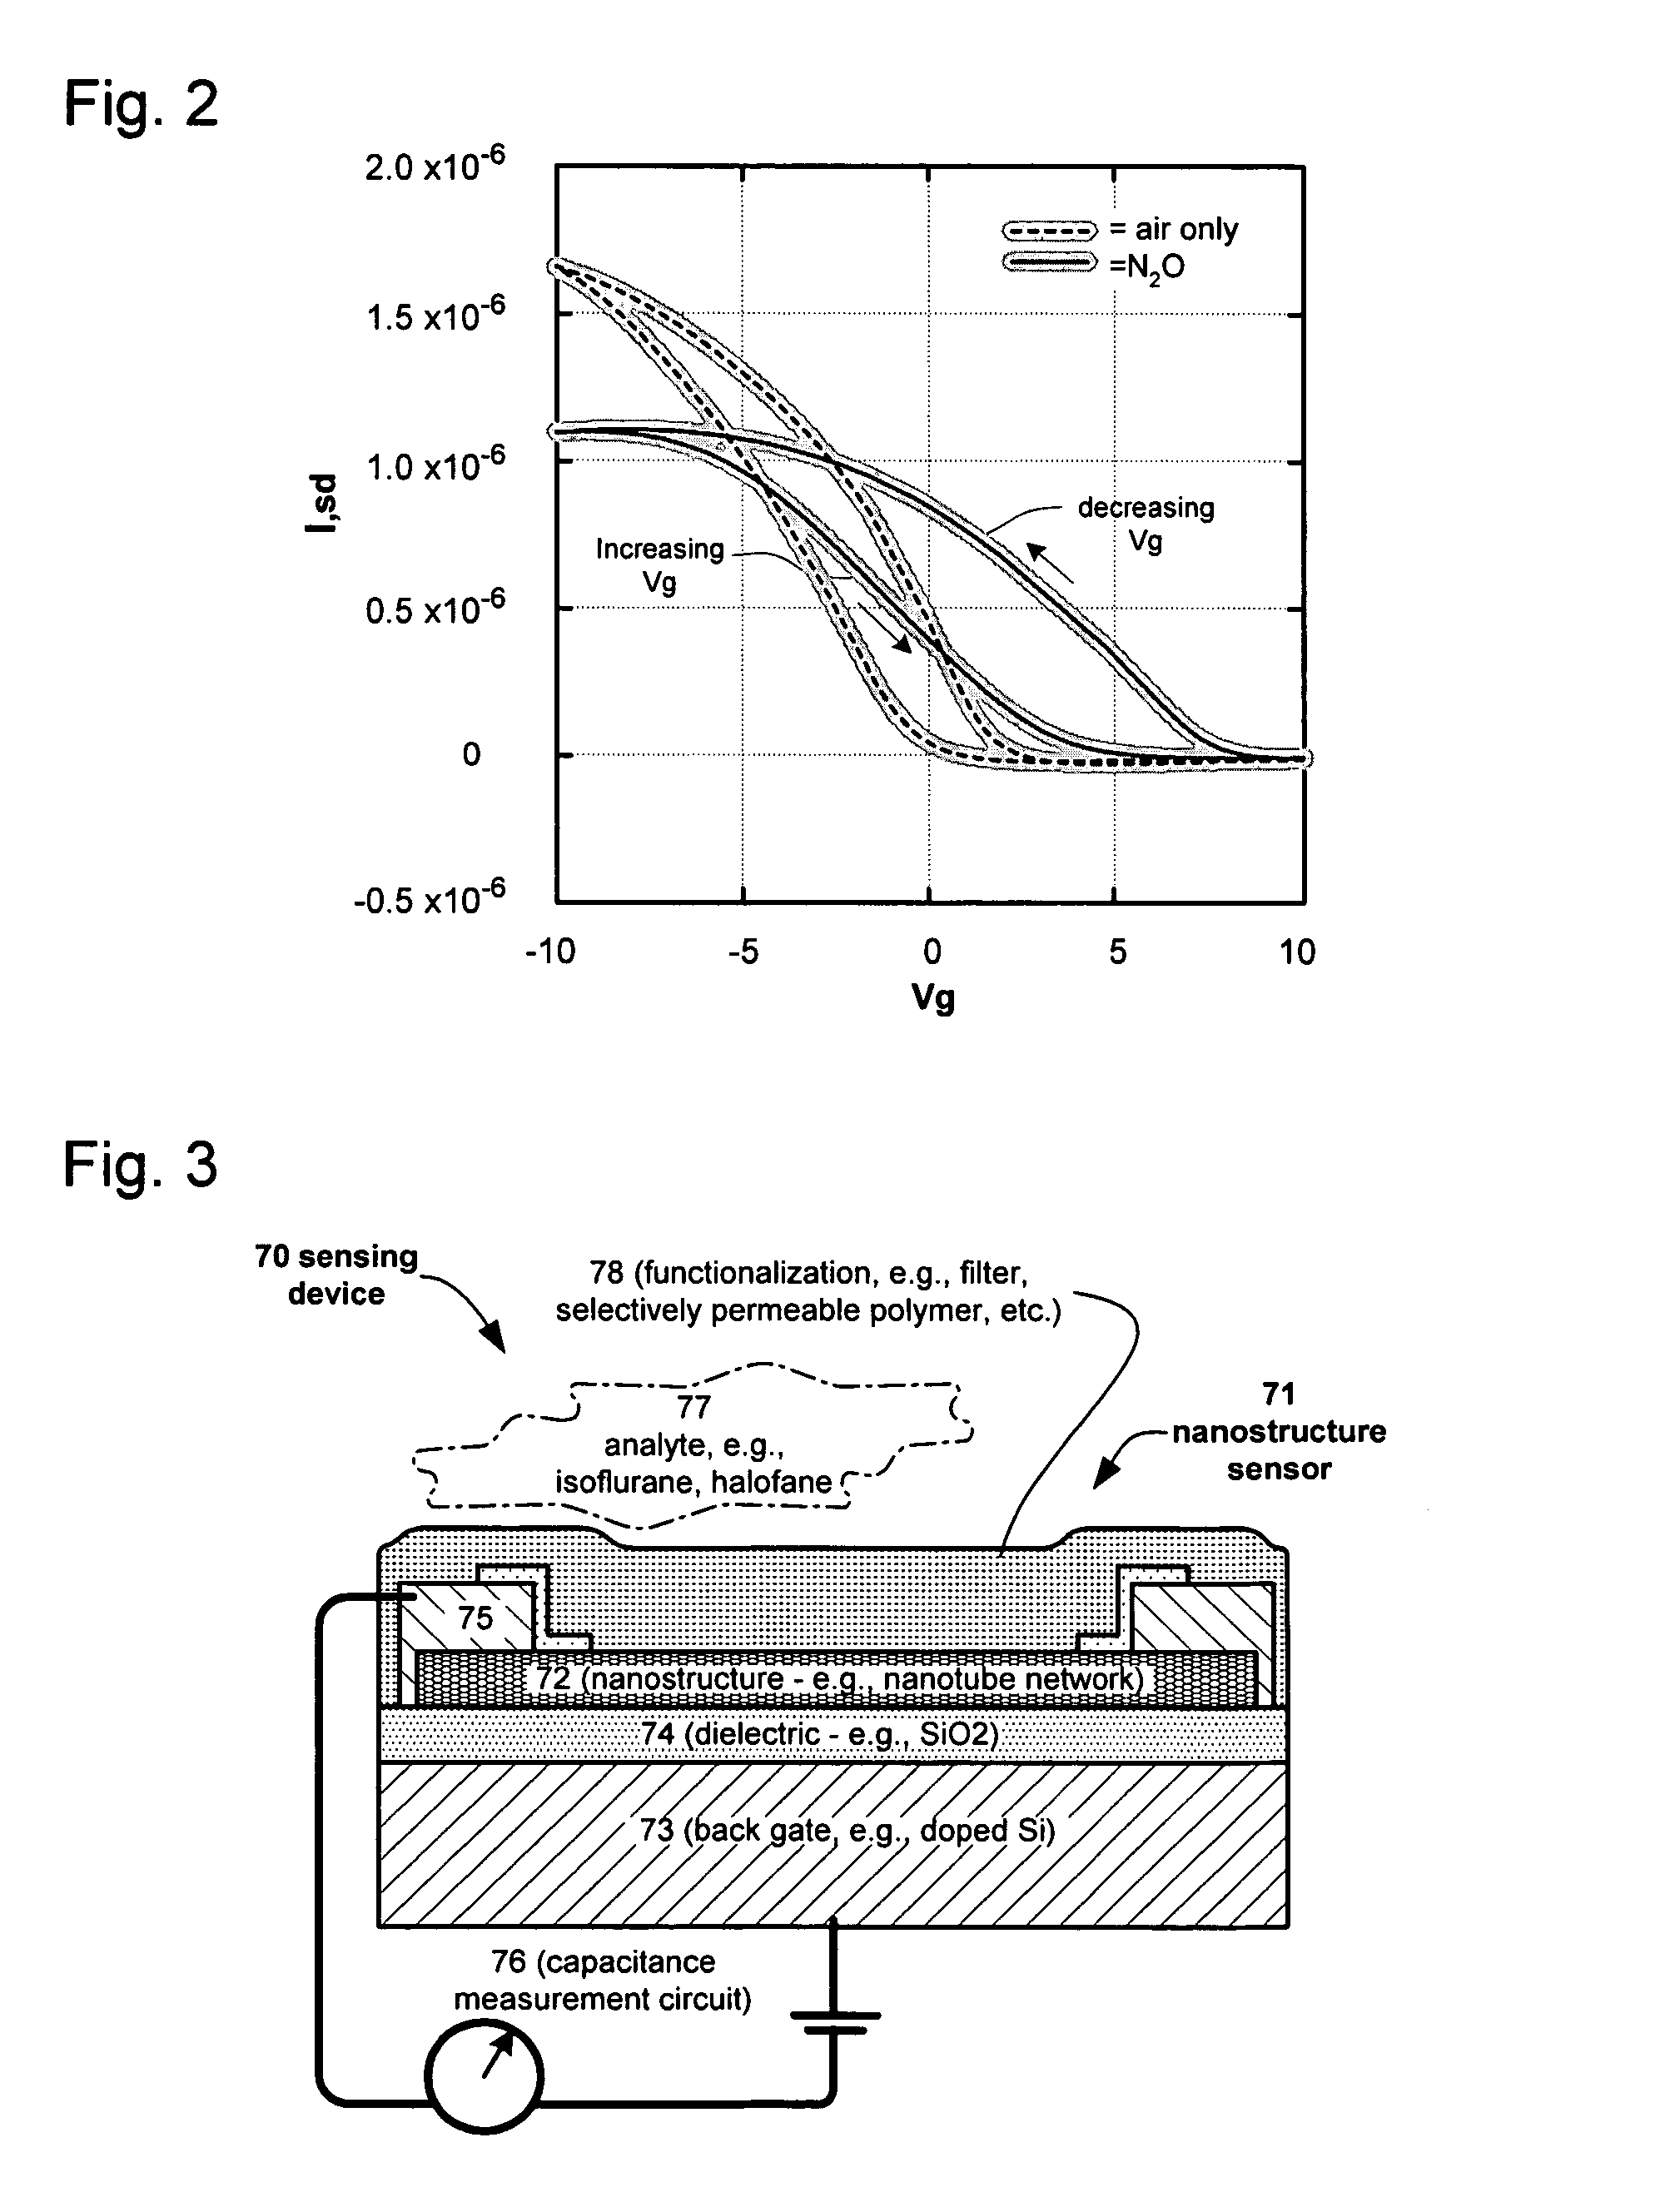 Nano-electronic sensors for chemical and biological analytes, including capacitance and bio-membrane devices